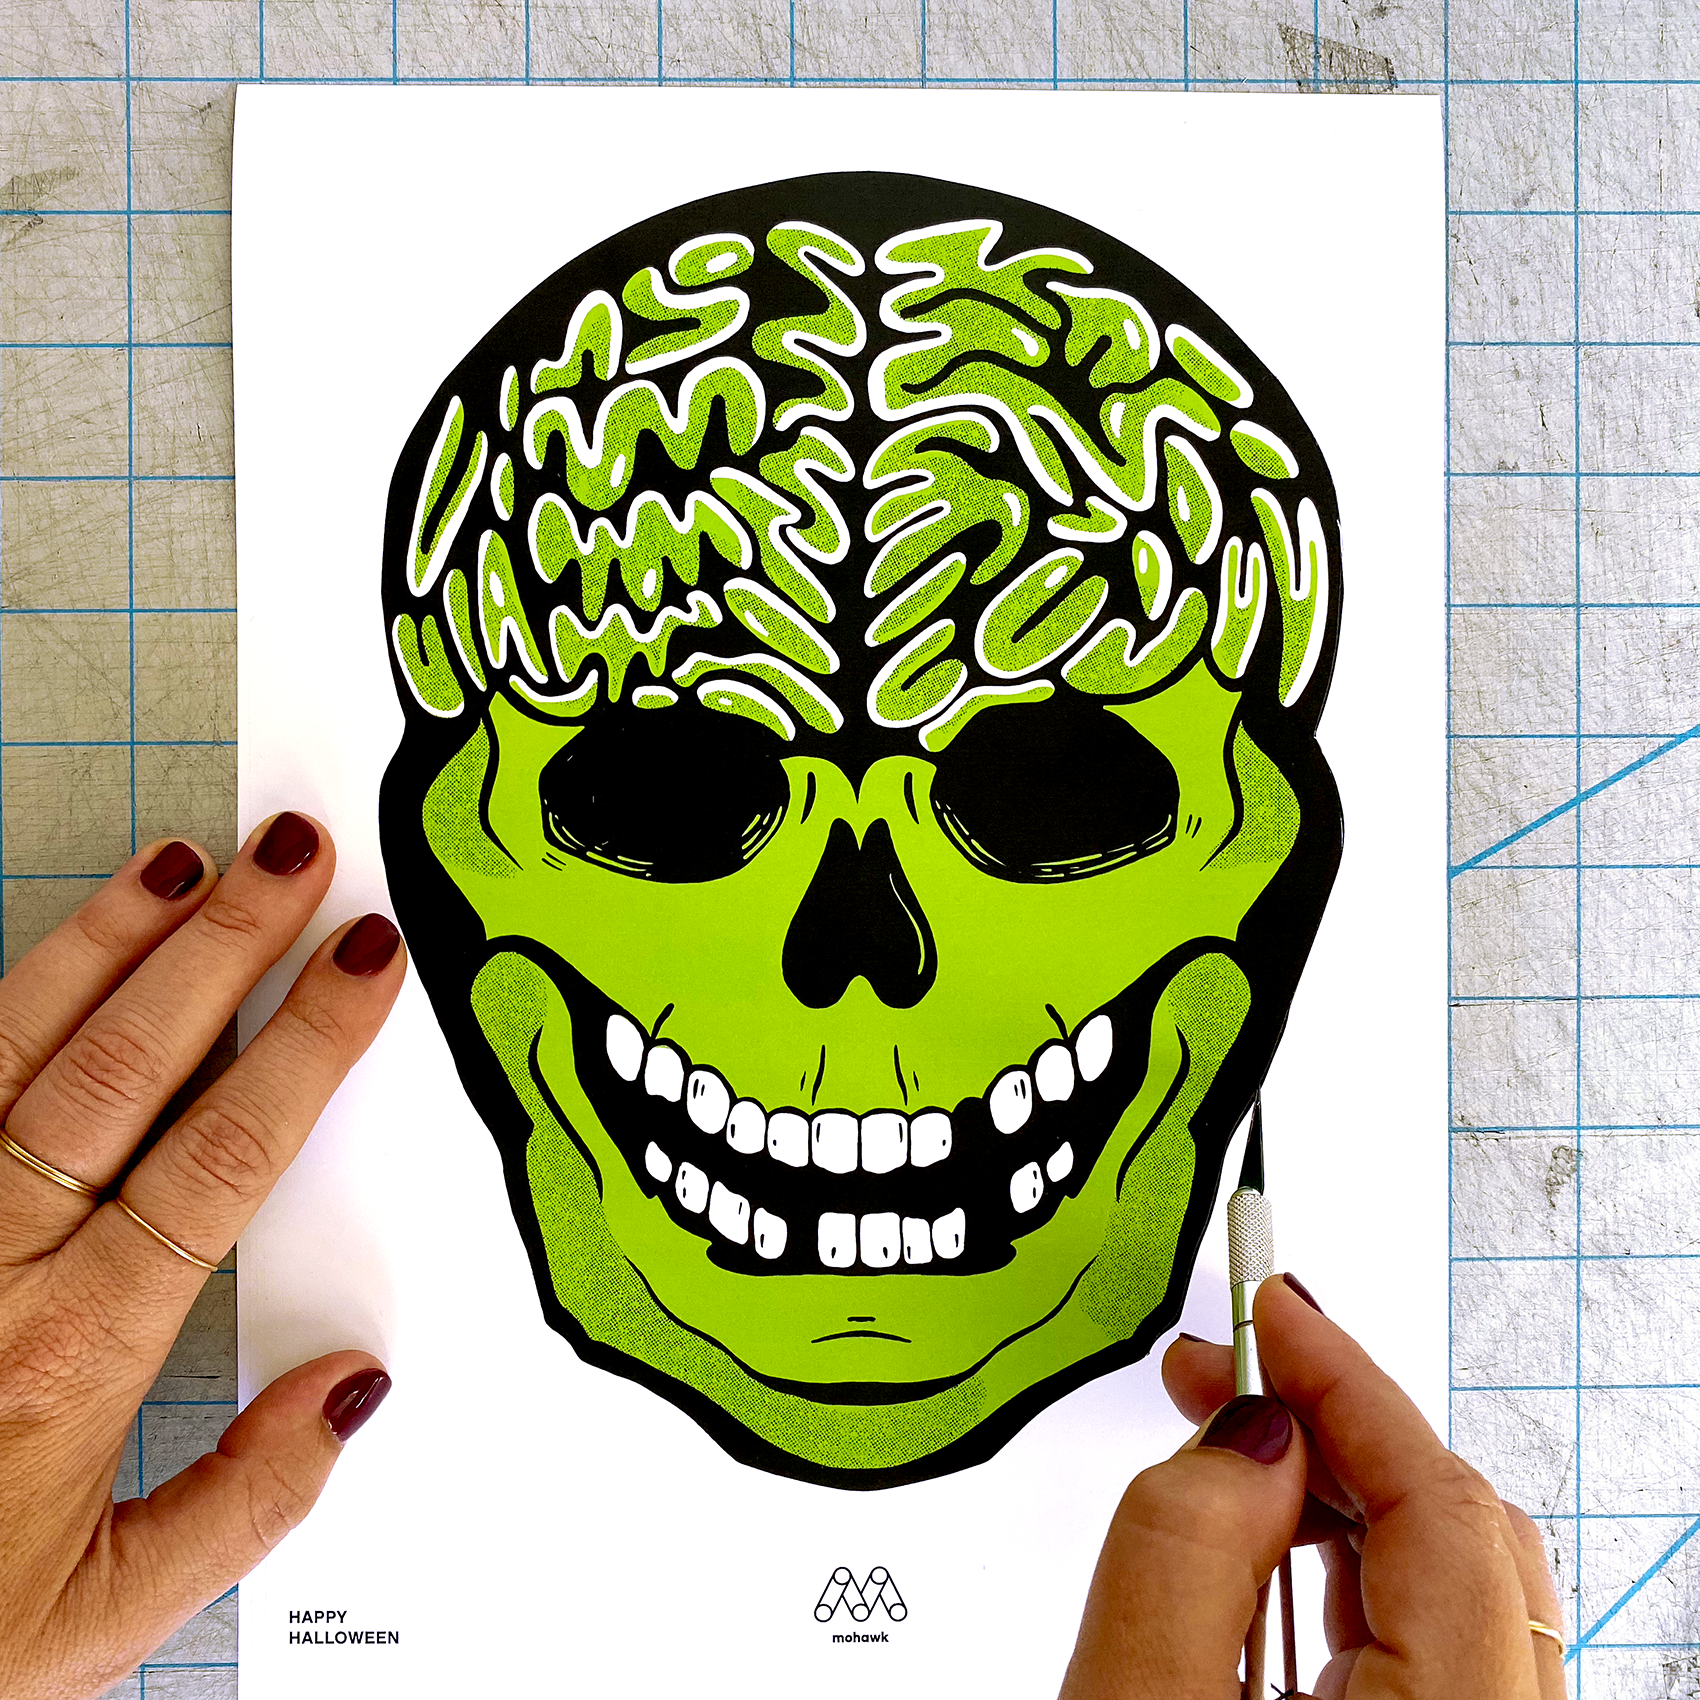 Skull template being cut